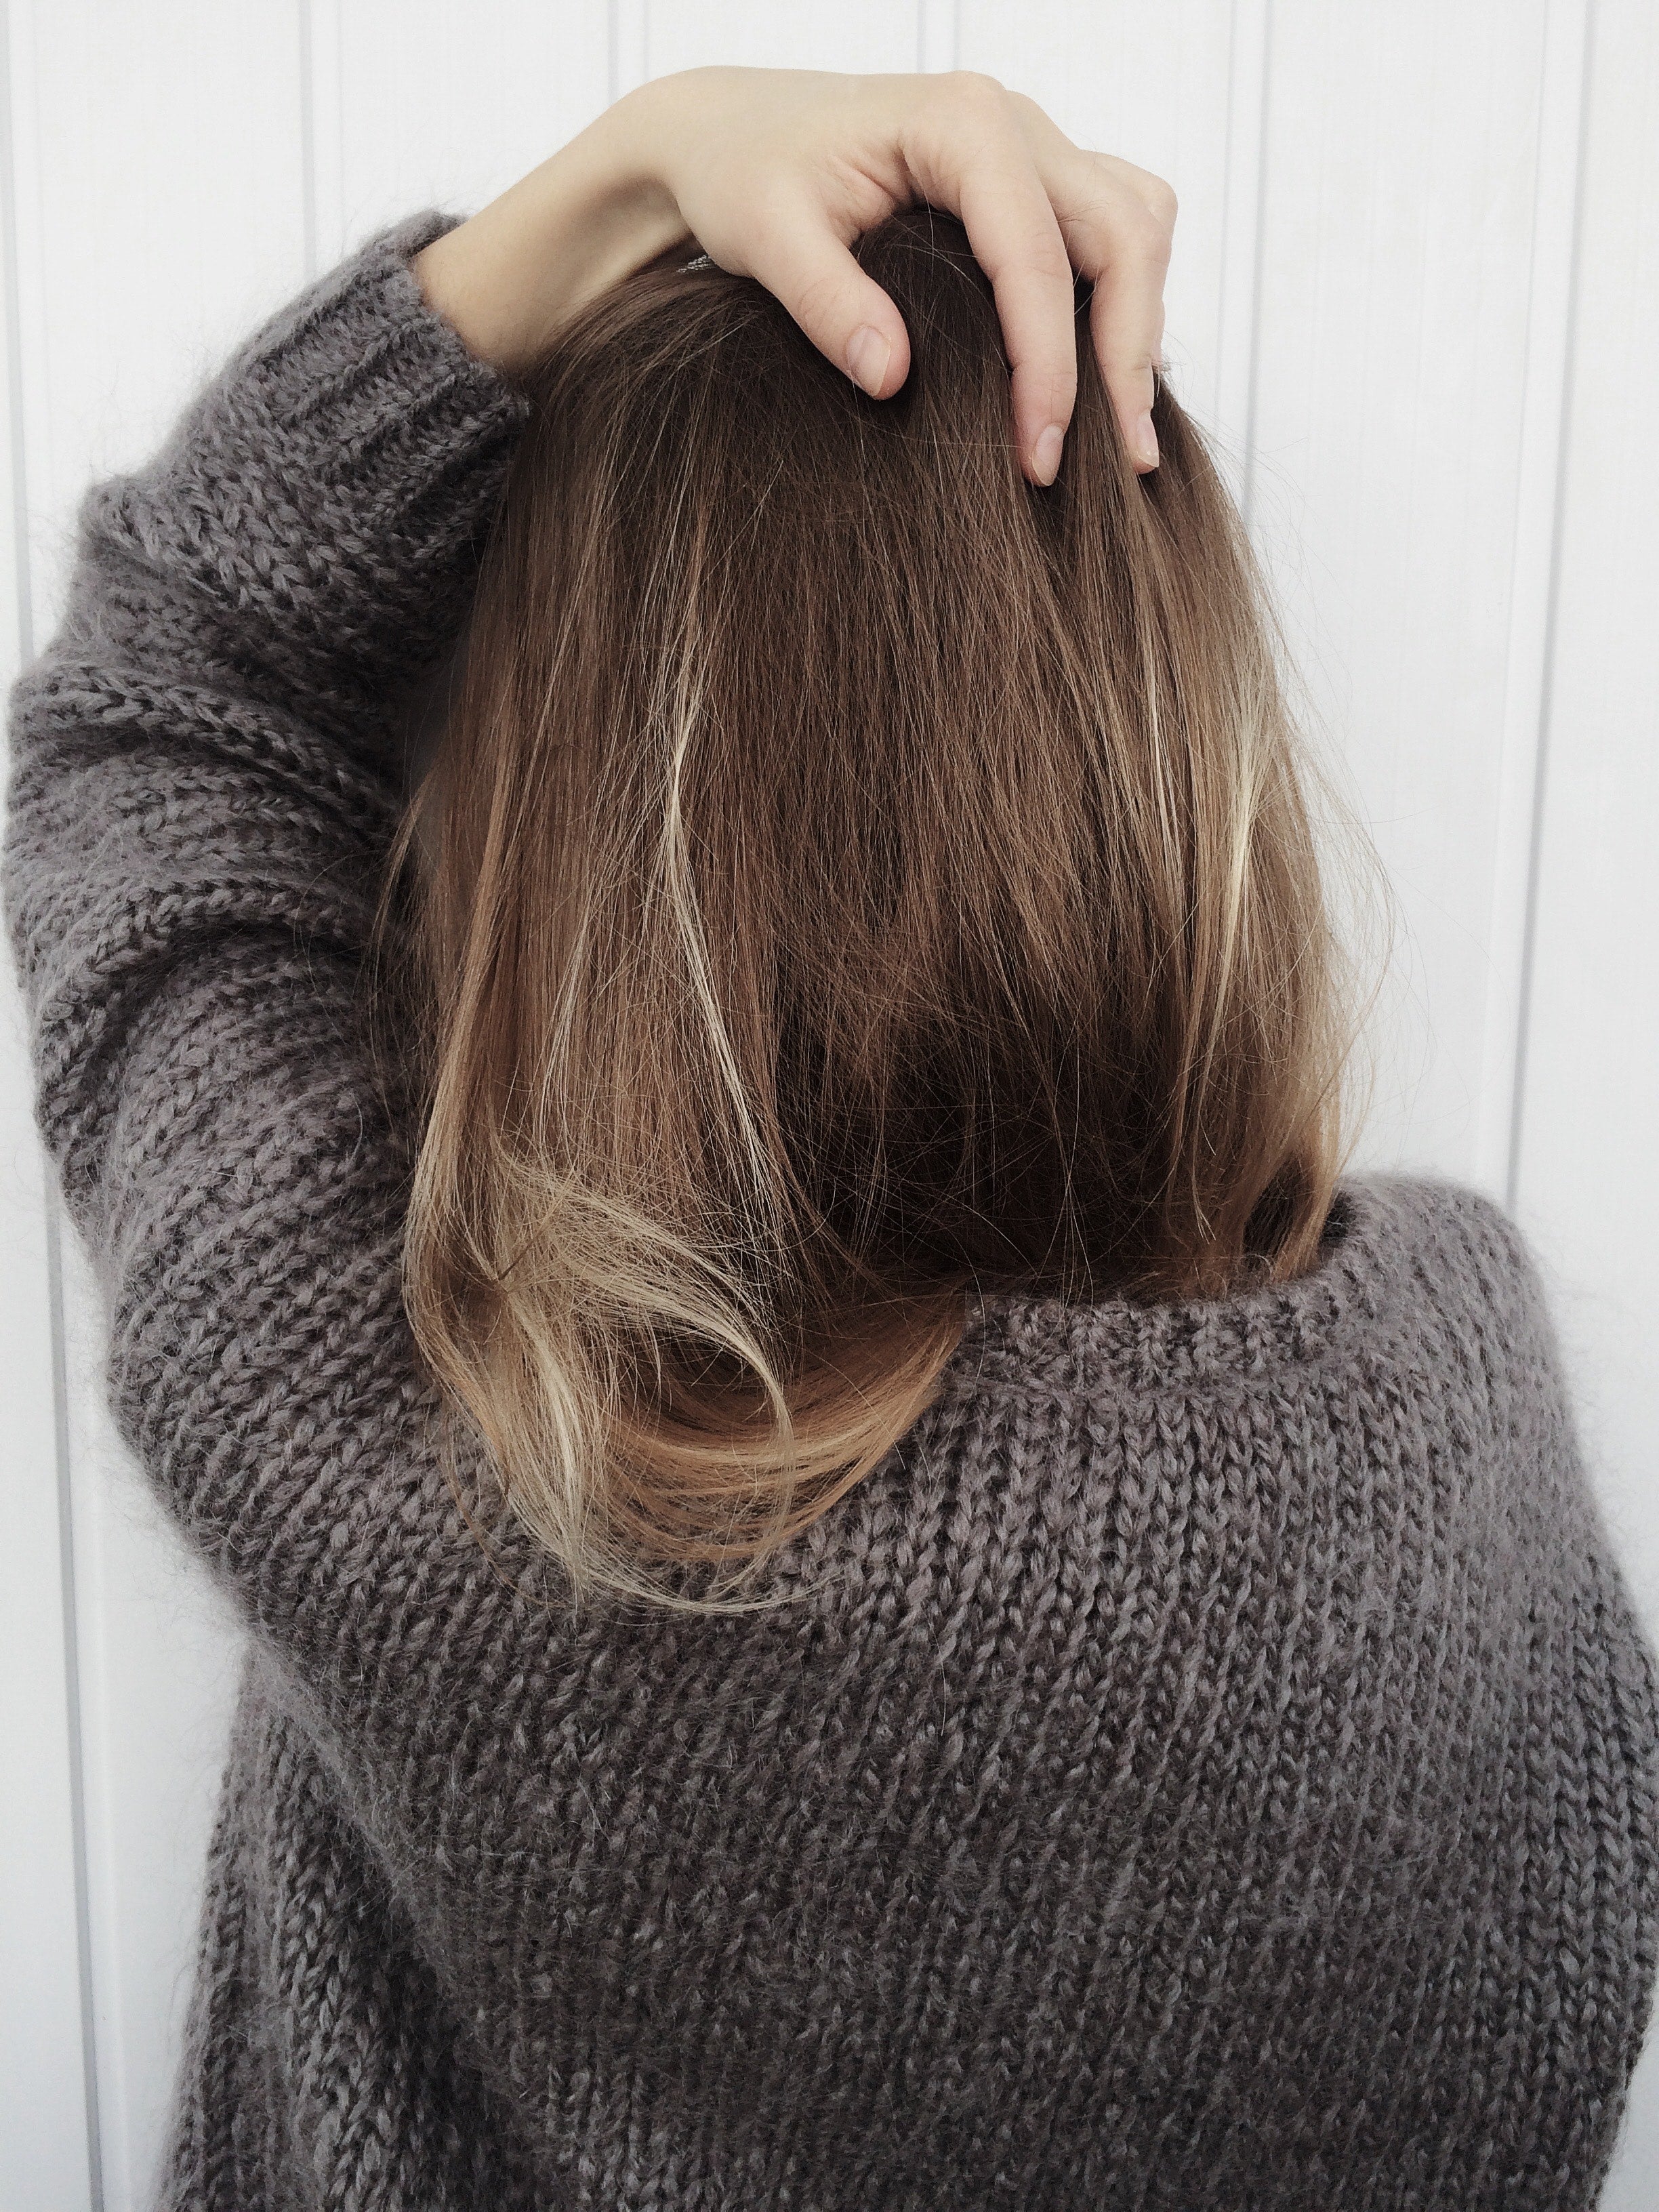 What No One Has Told You About Your Scalp